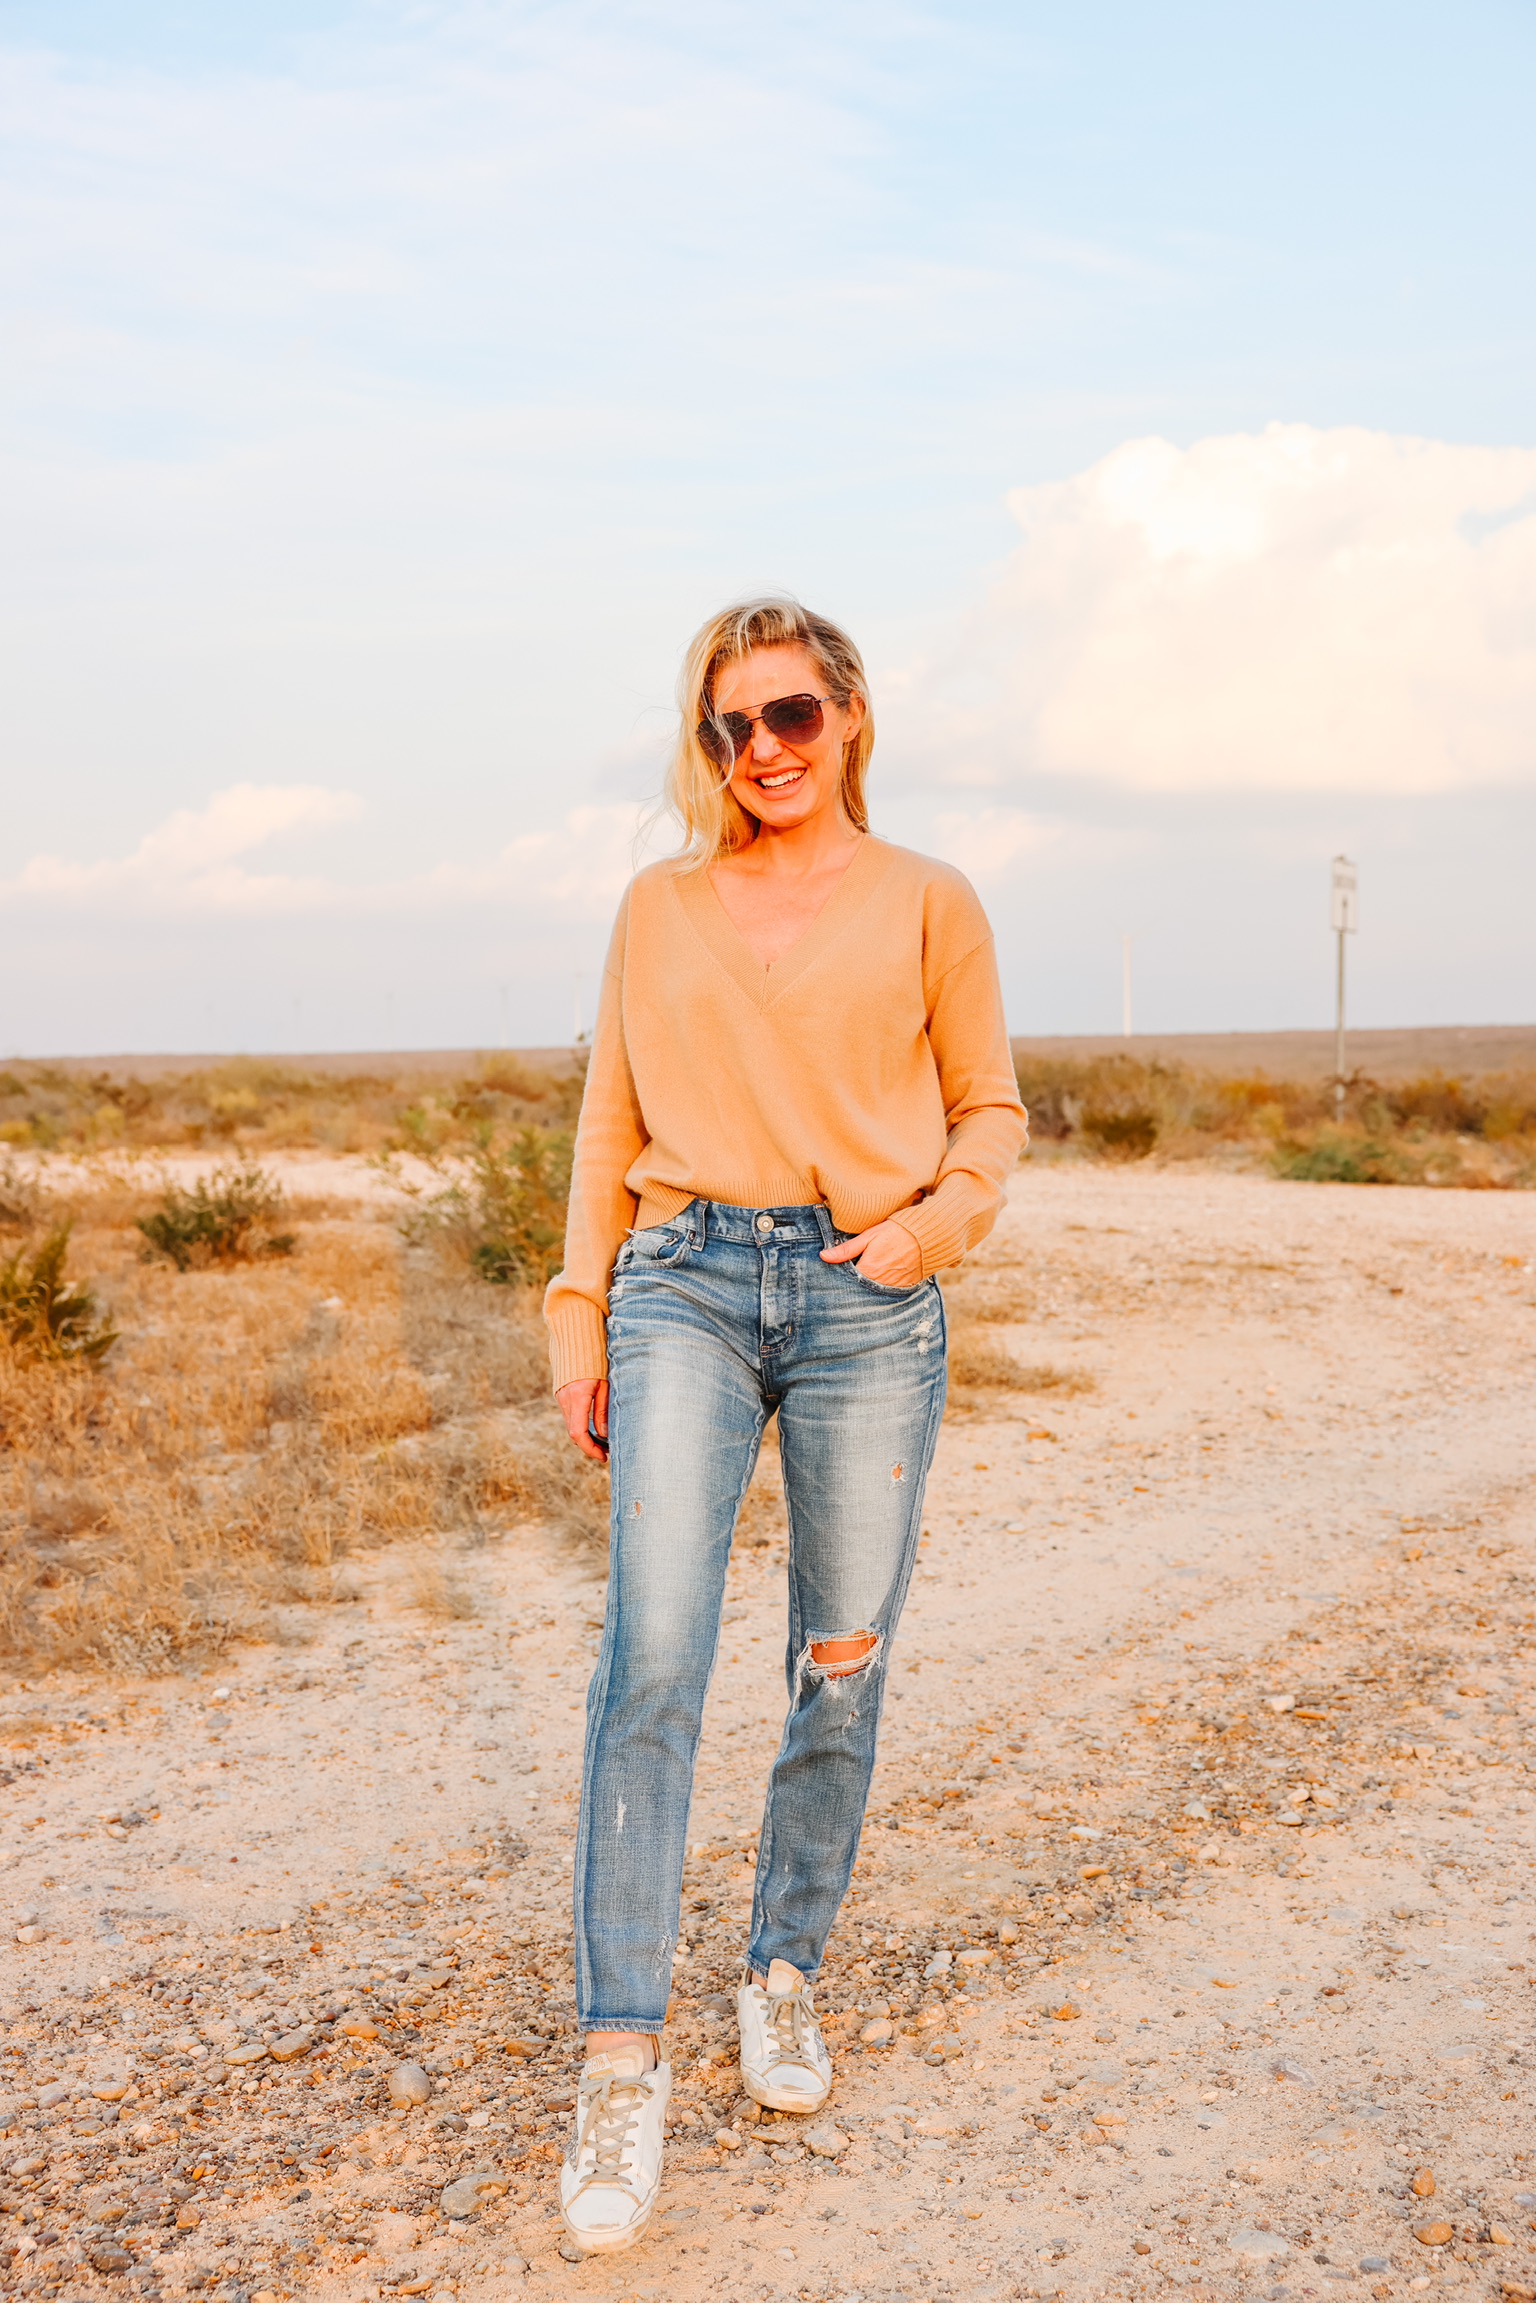 elevated basics, Erin Busbee of Busbee wearing a camel cashmere v-neck sweater from INtermix with distressed skinny jeans by Moussy Vintage and white golden goose sneakers in south Texas, hottest summer shoes